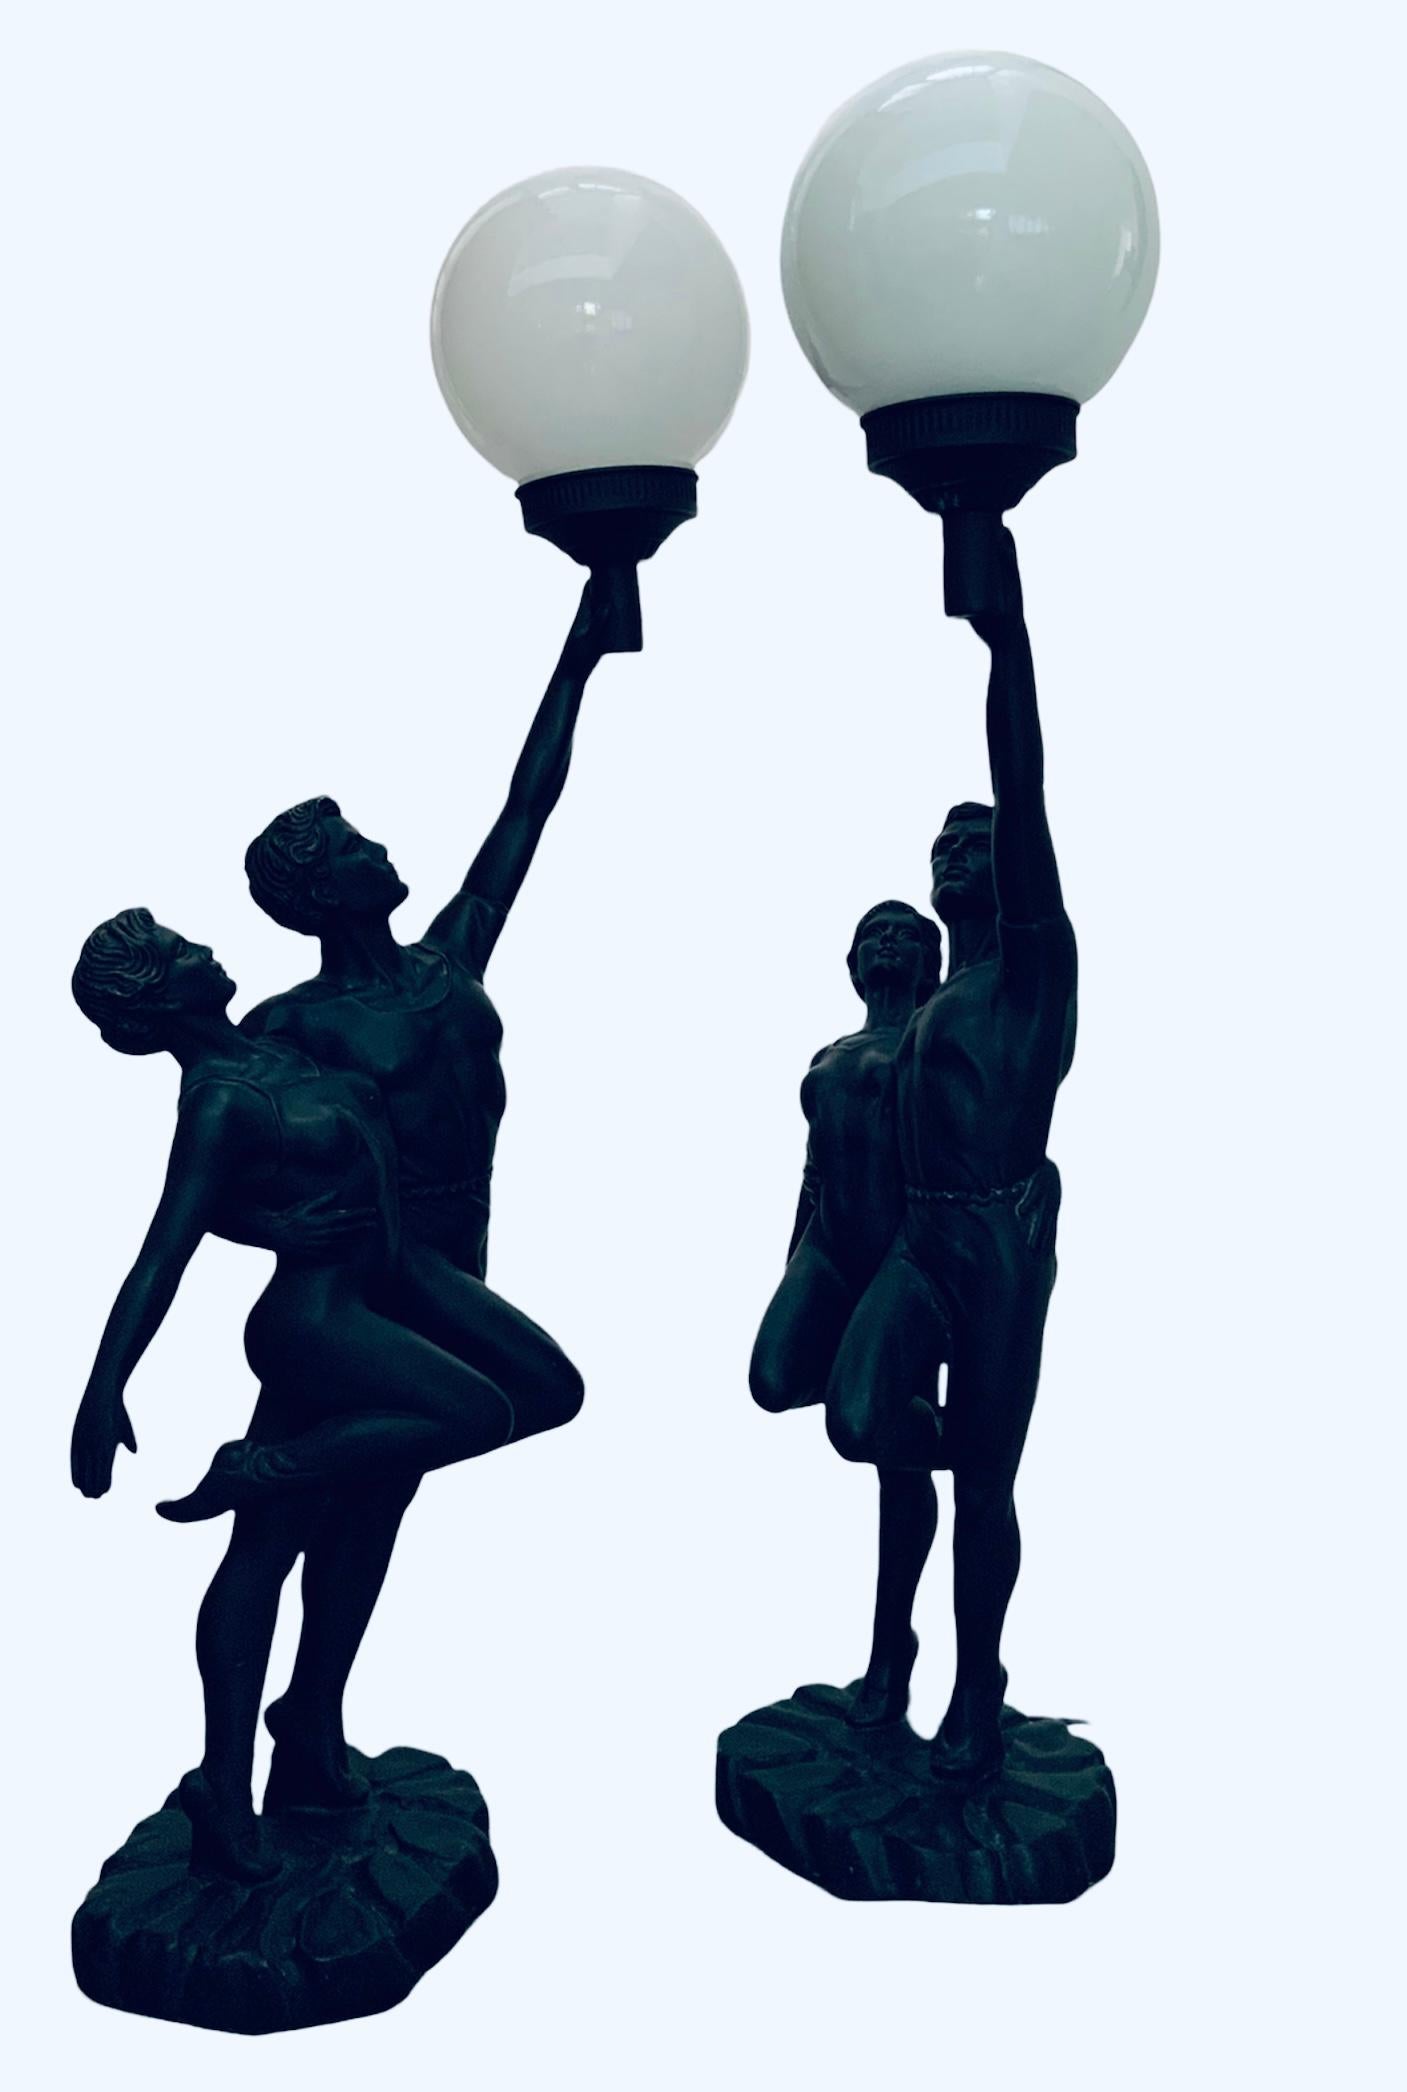 This is a pair of 1993 Crosa resin sculptures of a couple of dancers/gymnasts lamps. They depict a young woman and a young man holding each other in the back in a position to start a dance or a competition. They have a gymnastics or dancer outfit.